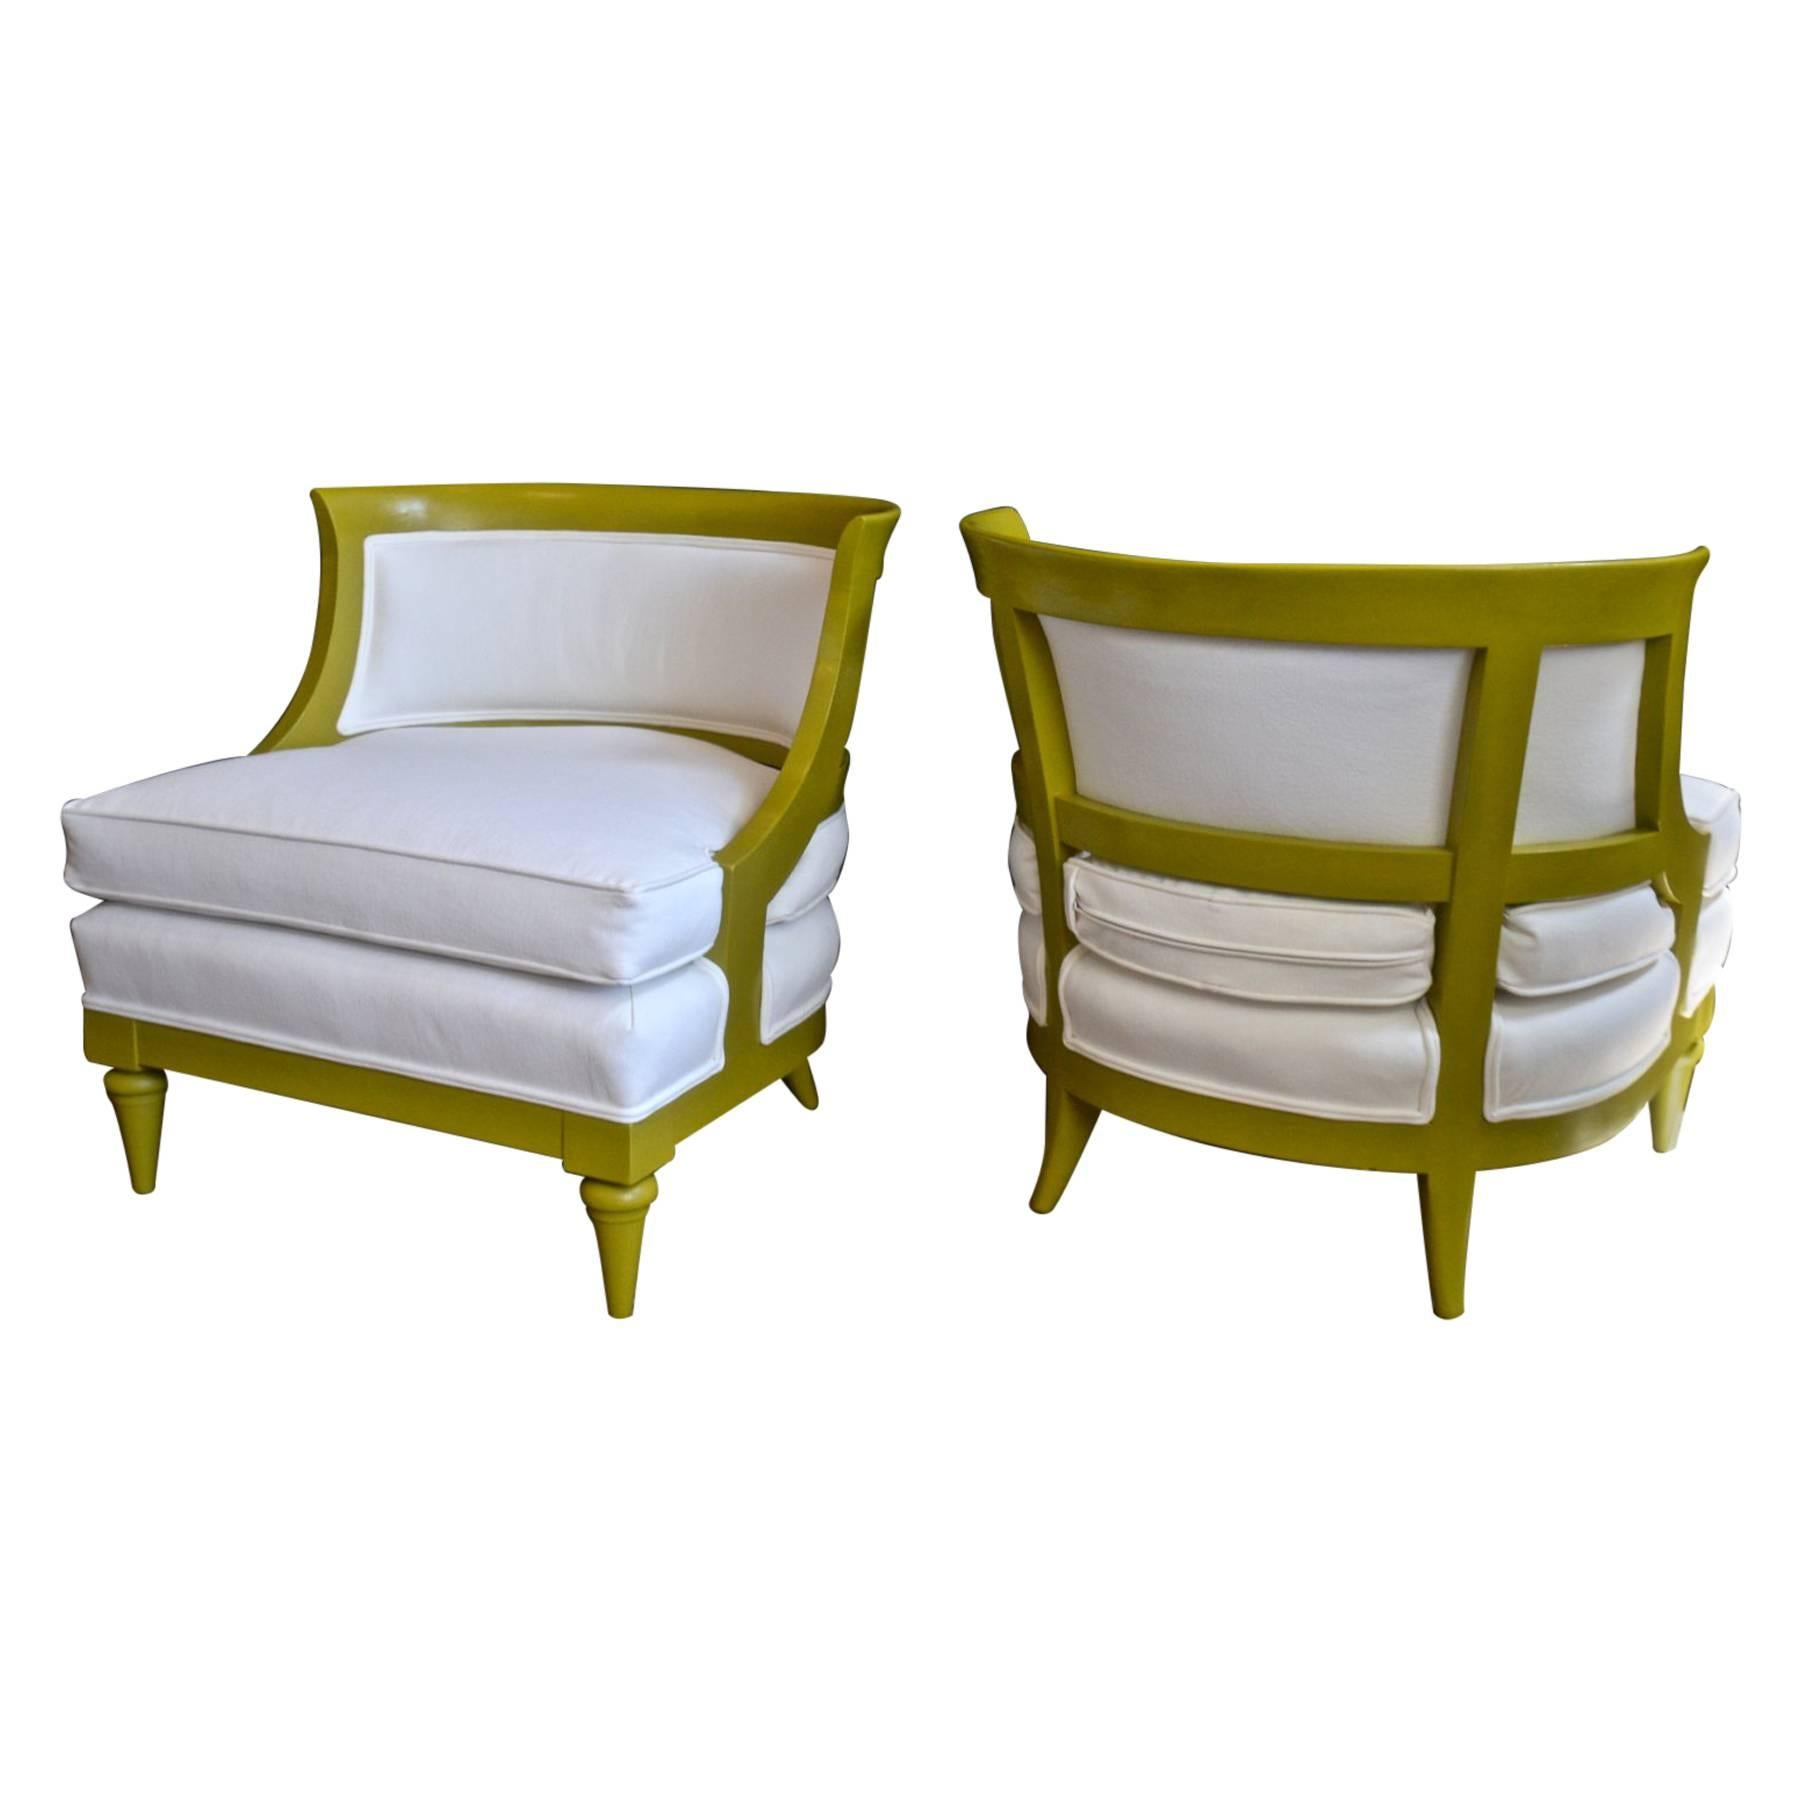 Pair of Slipper Chairs in Chartreuse